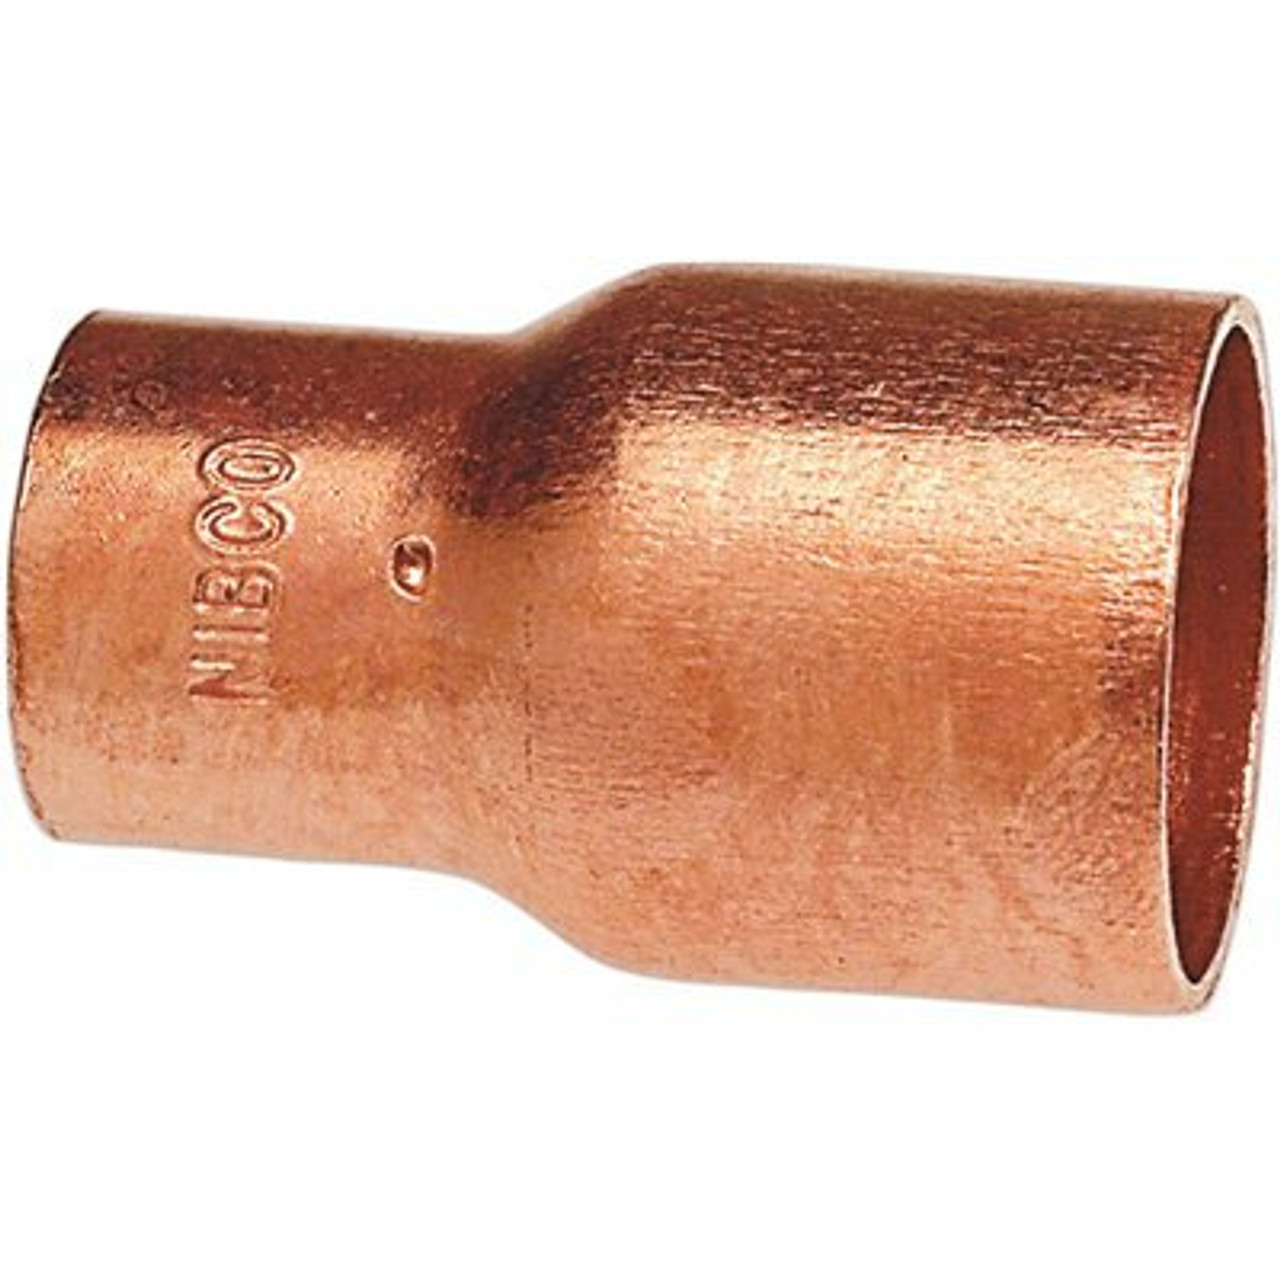 Nibco 1 In. X 3/4 In. Wrot Copper C X C Reducing Coupling (25-Pack)